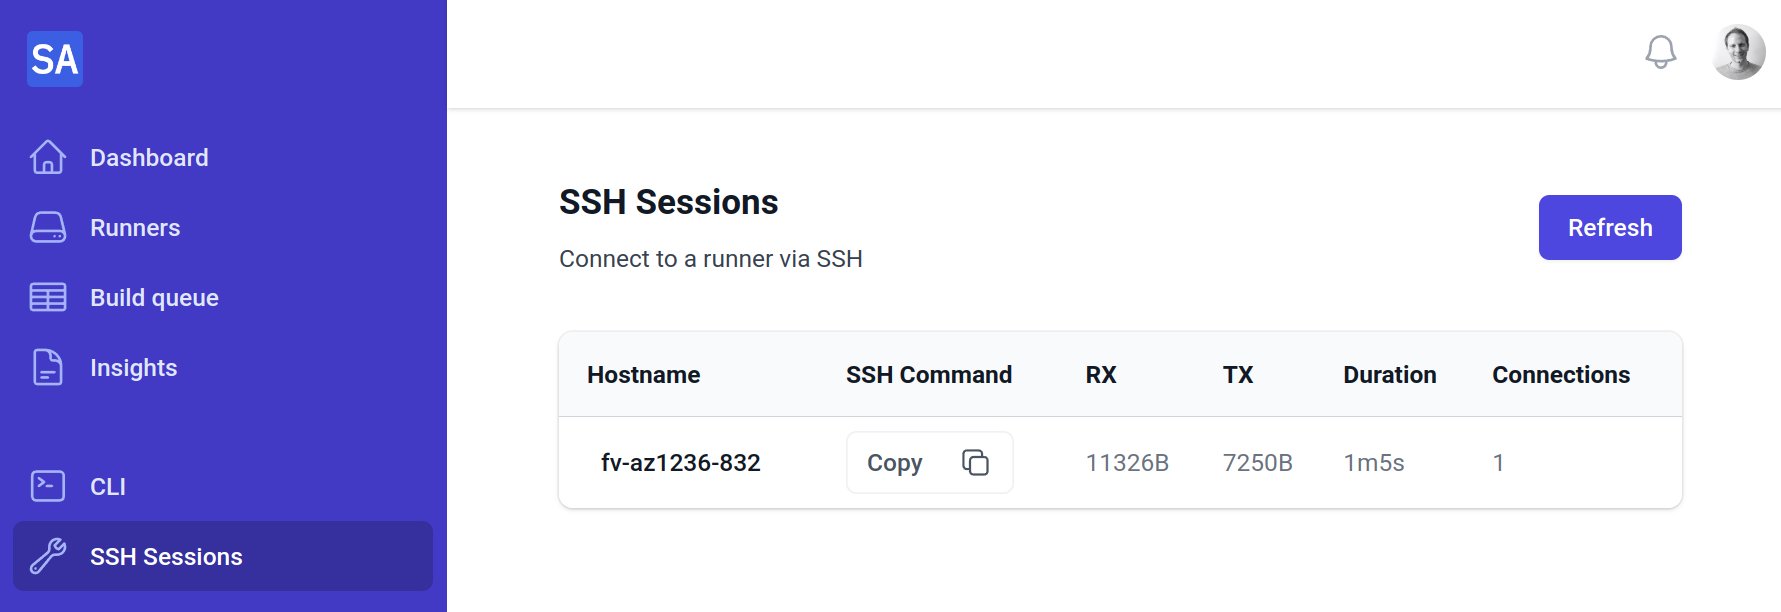 SSH sessions in the dashboard